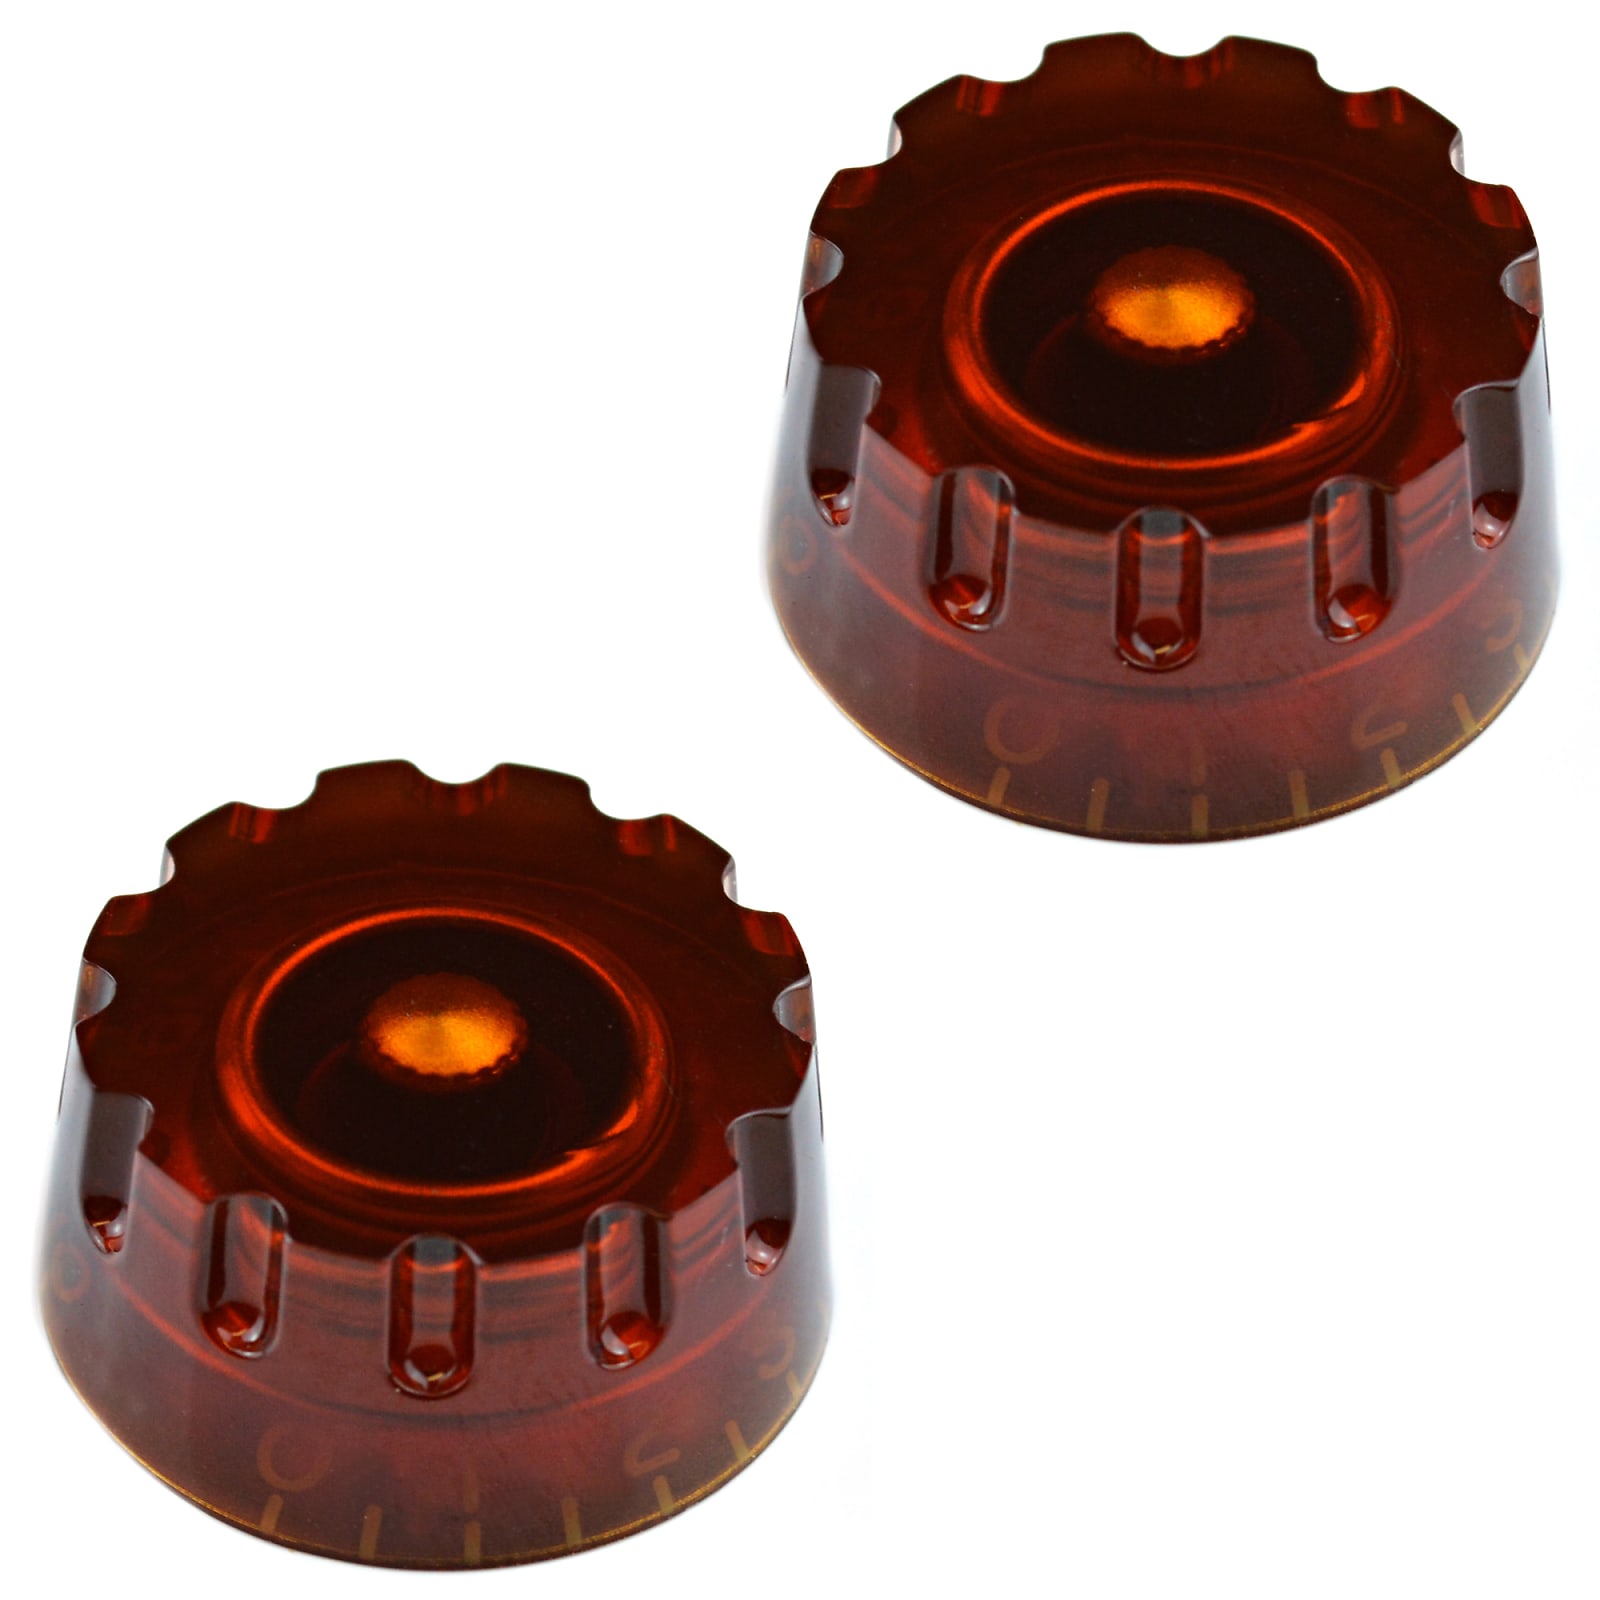 AMBER SPEED KNOBS METRIC *NEW* SET OF 2 FOR EPIPHONE® & IMPORT GUITARS 